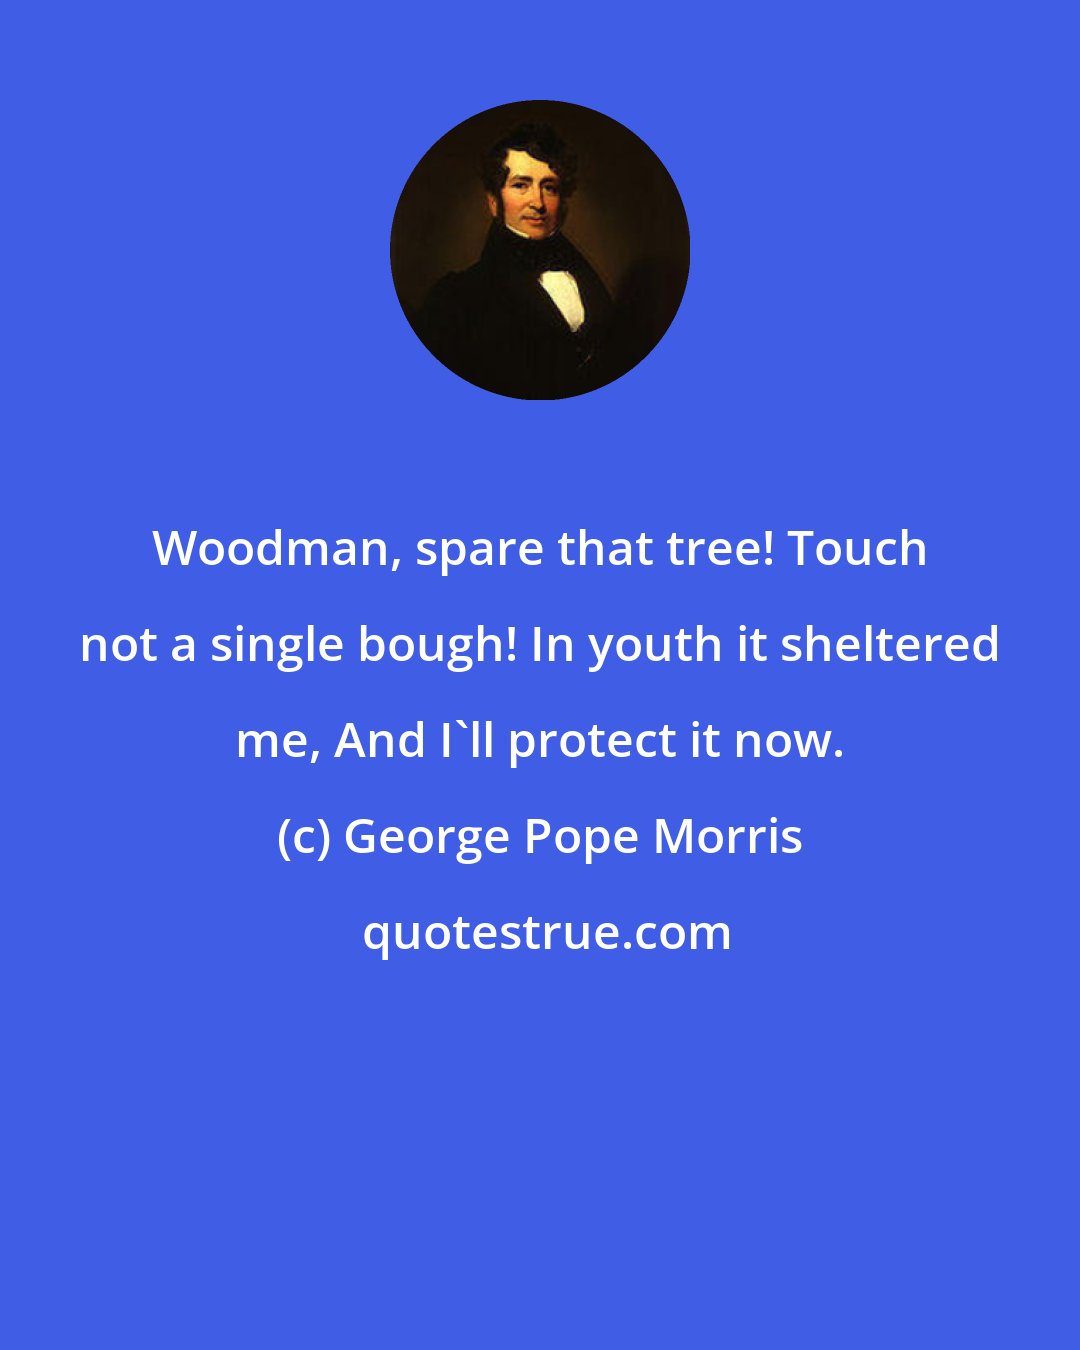 George Pope Morris: Woodman, spare that tree! Touch not a single bough! In youth it sheltered me, And I'll protect it now.